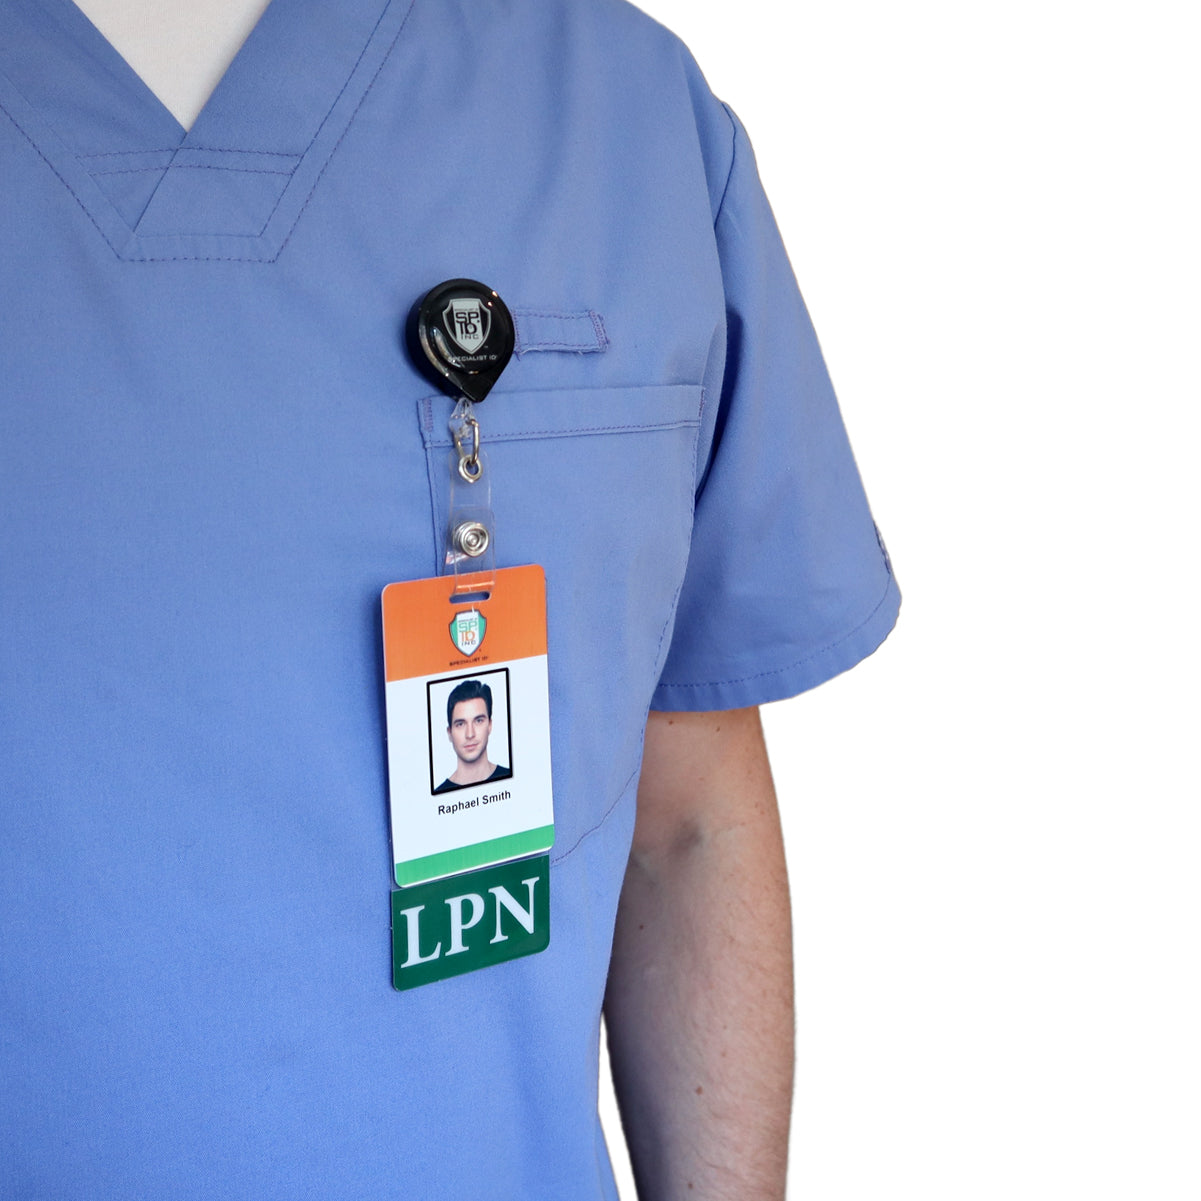 A person wearing a light blue medical scrub top with a Clear LPN Badge Buddy Vertical with Green Border for Licensed Practical Nurses and a vertical ID badge displaying a photo, the name Raphael Smith, and "LPN" text attached.